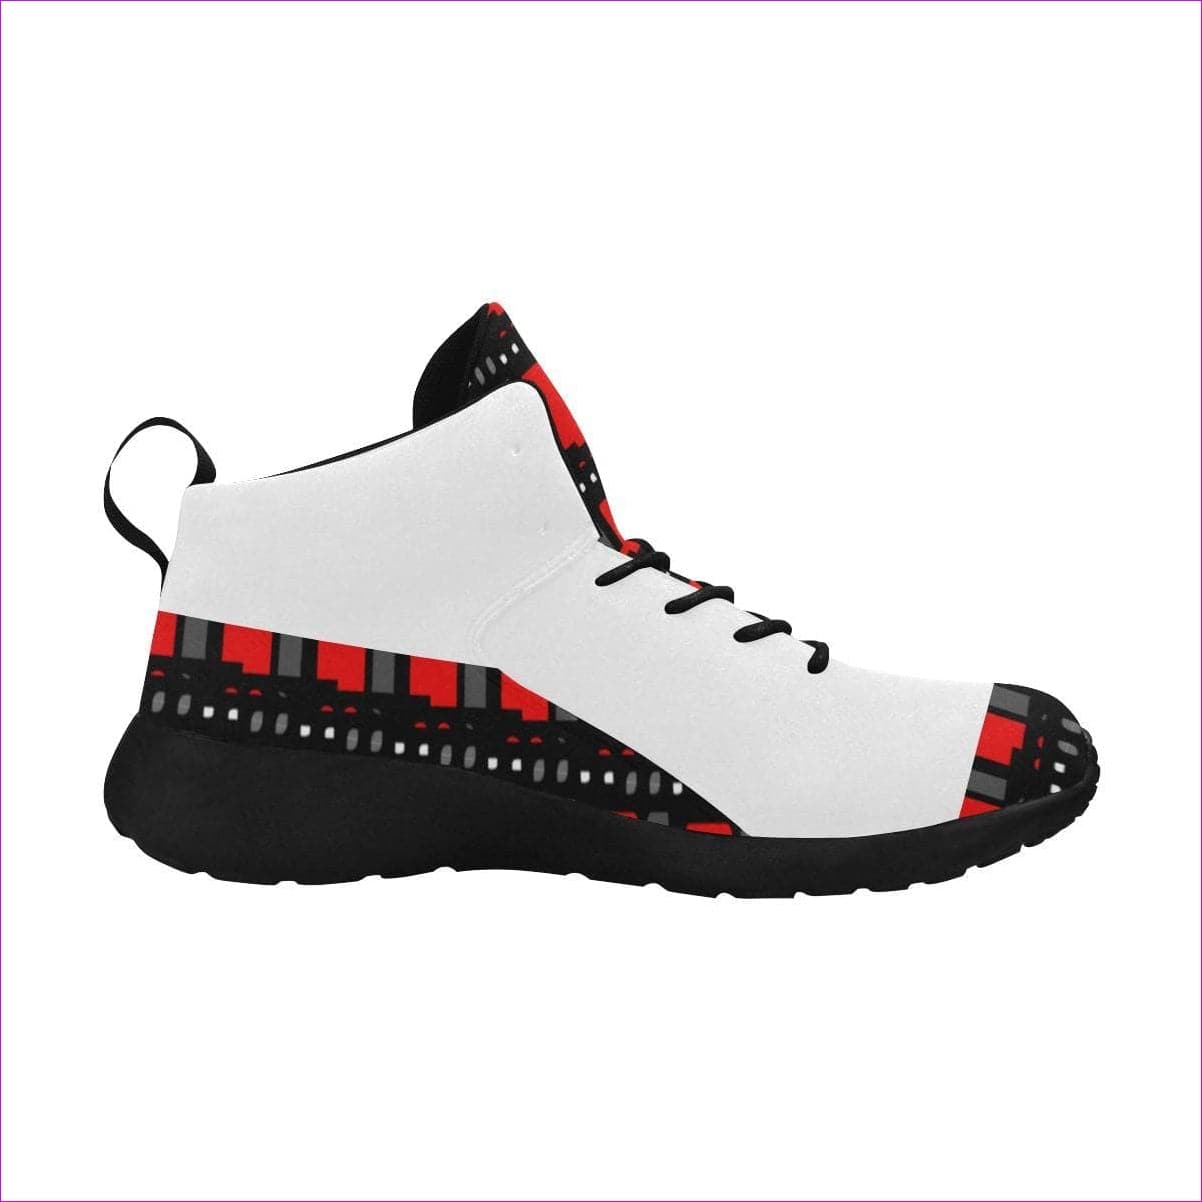 - Edgy Men's Basketball Shoes - mens shoe at TFC&H Co.